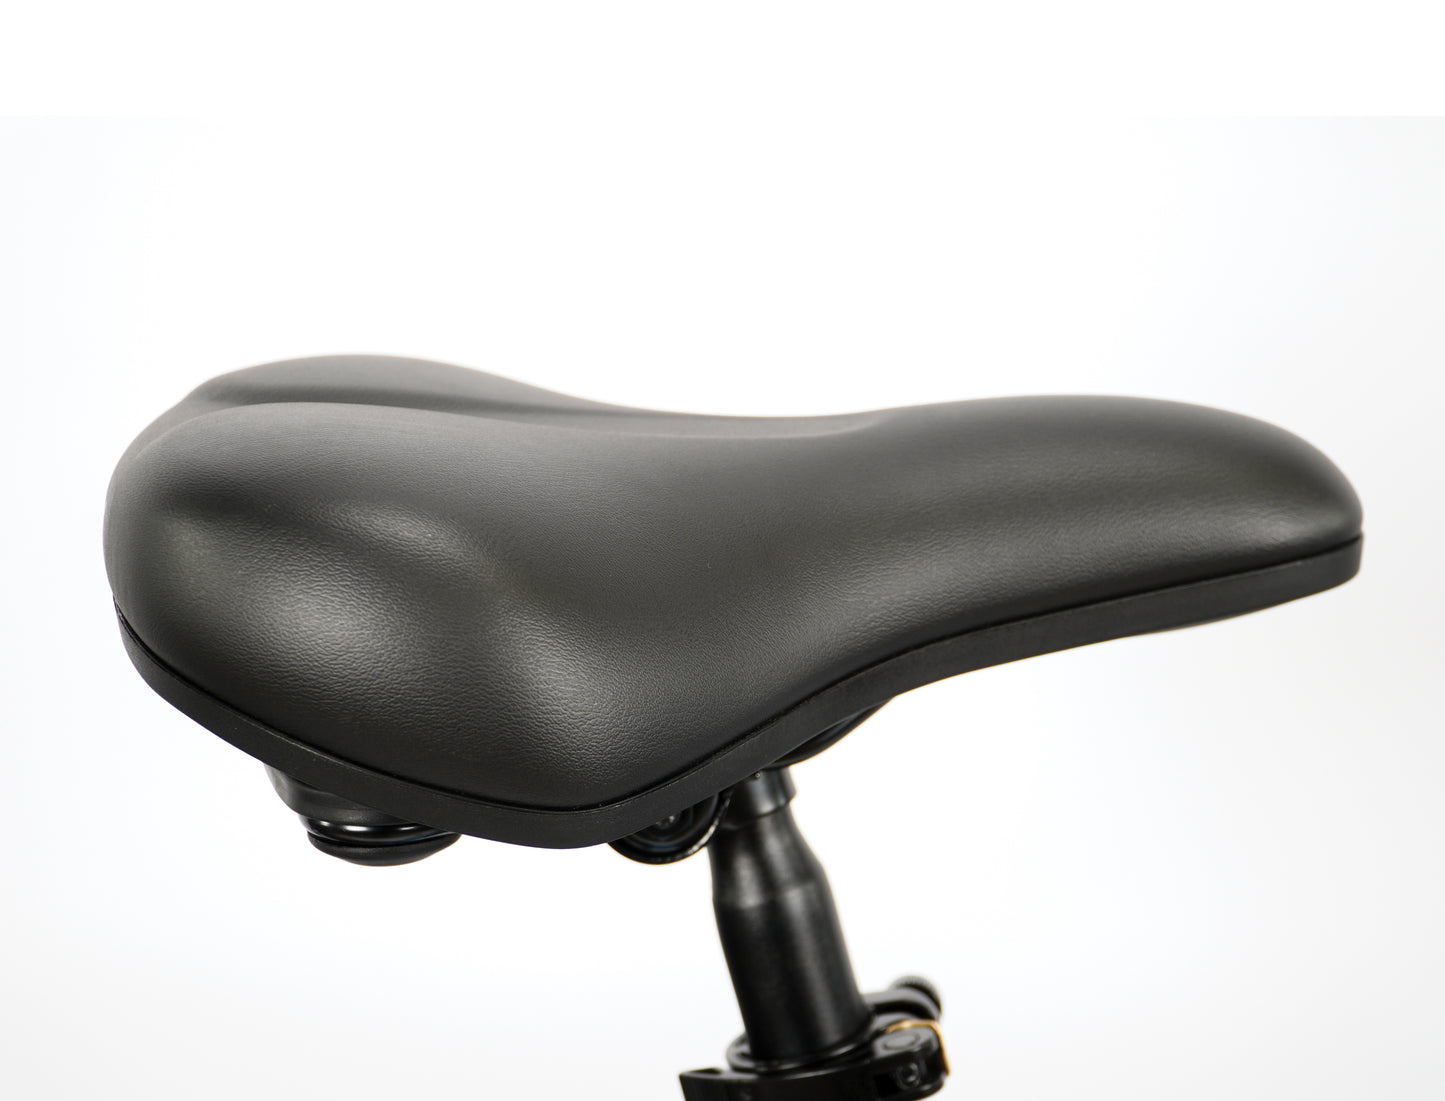 Everyday EverEasy electric cargo bike comfort Seat with extra cushioning.